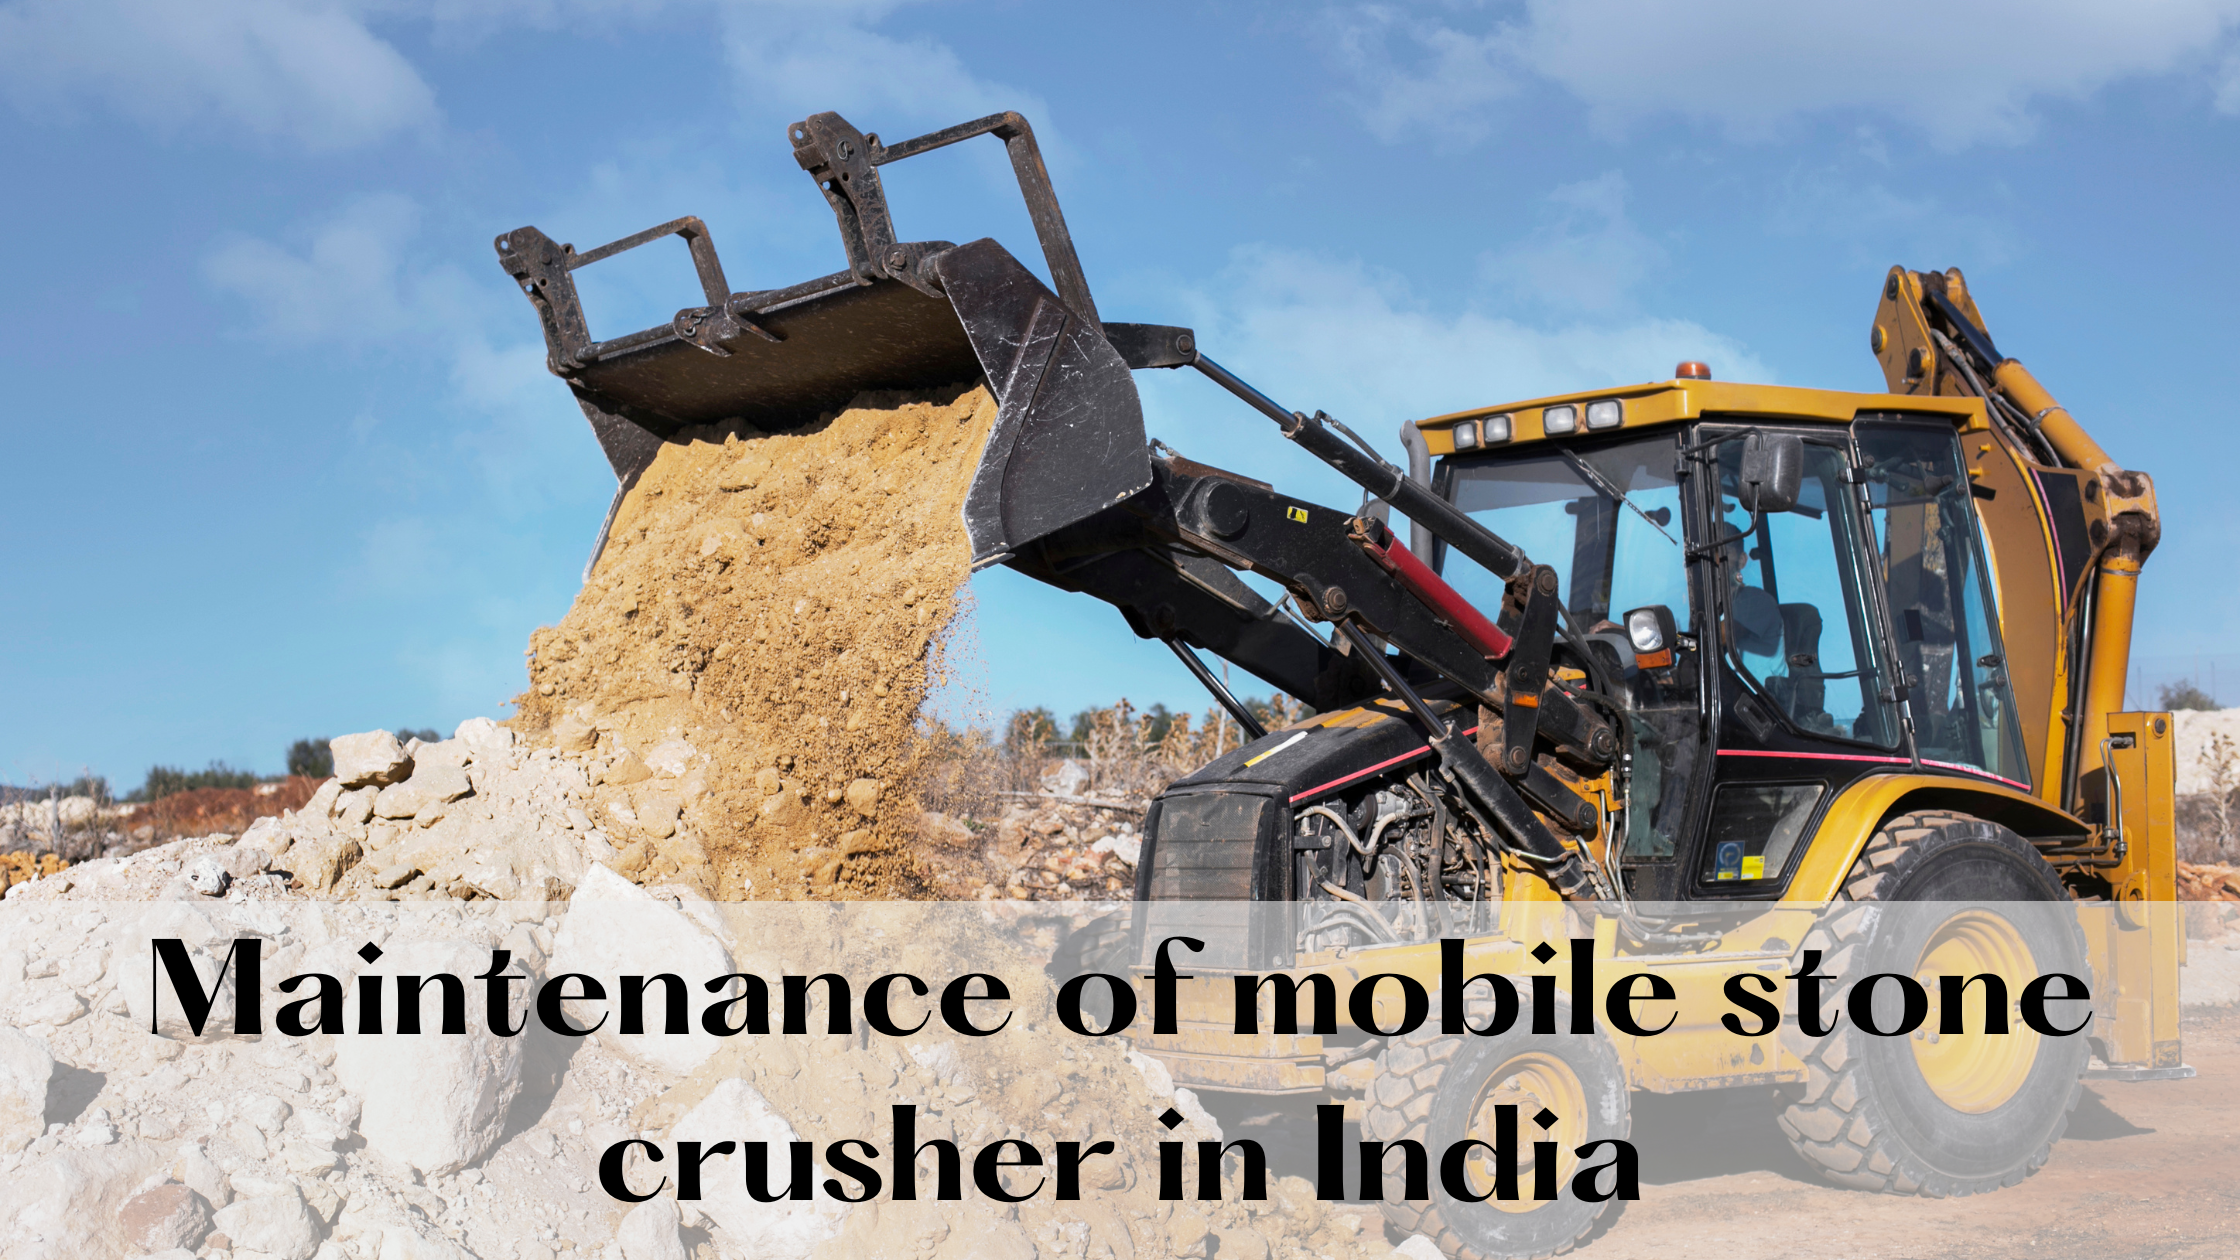 Maintenance of mobile stone crusher in India